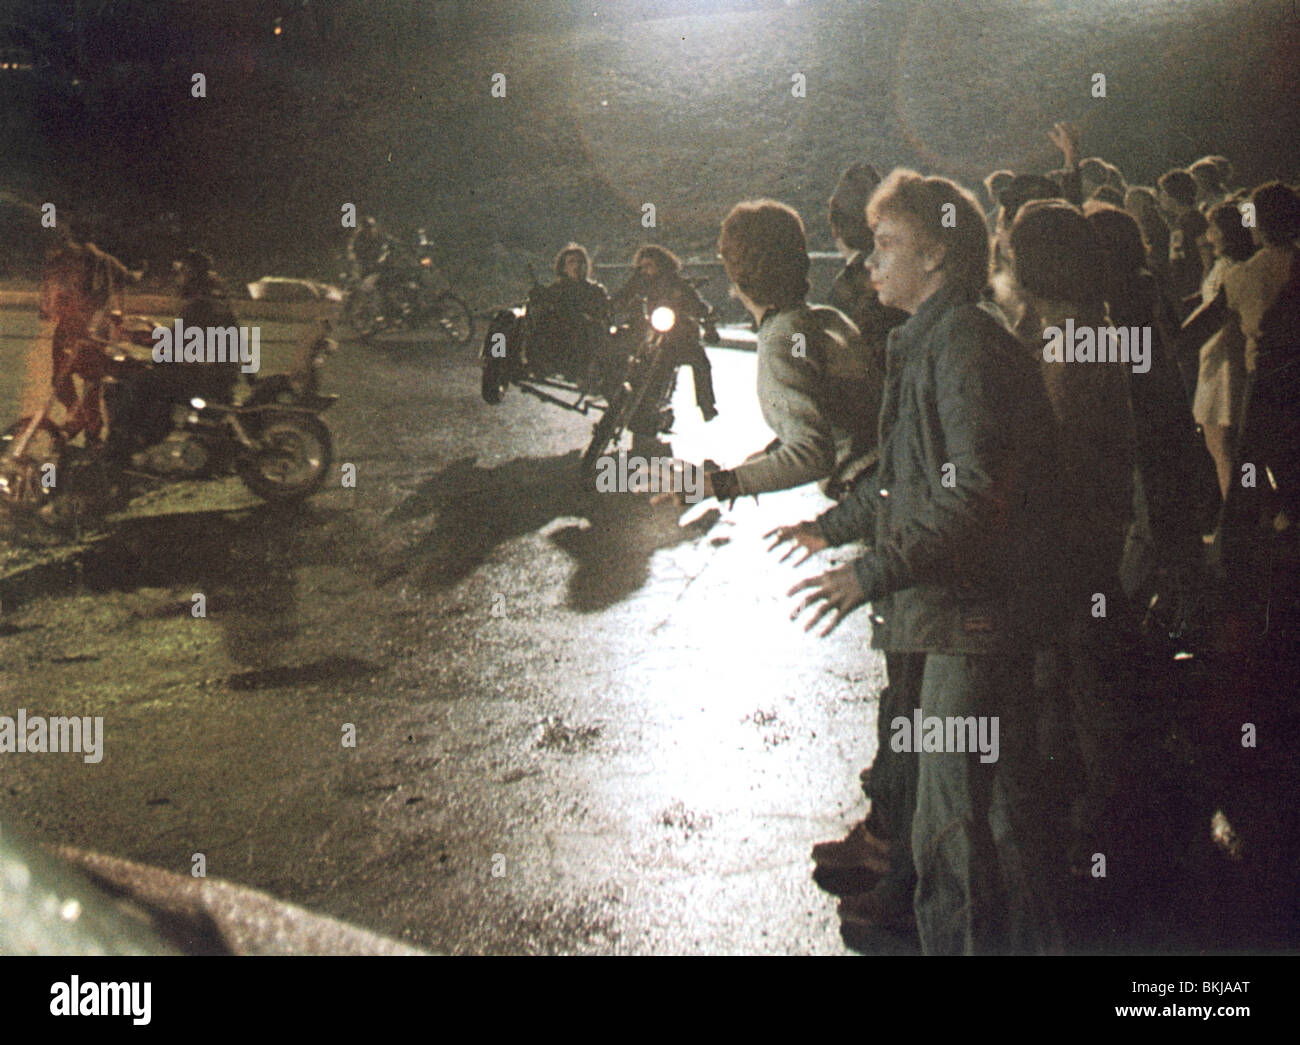 DAWN OF THE DEAD (1978) ZOMBIE (ALT) DODE 004 FOH Stock Photo